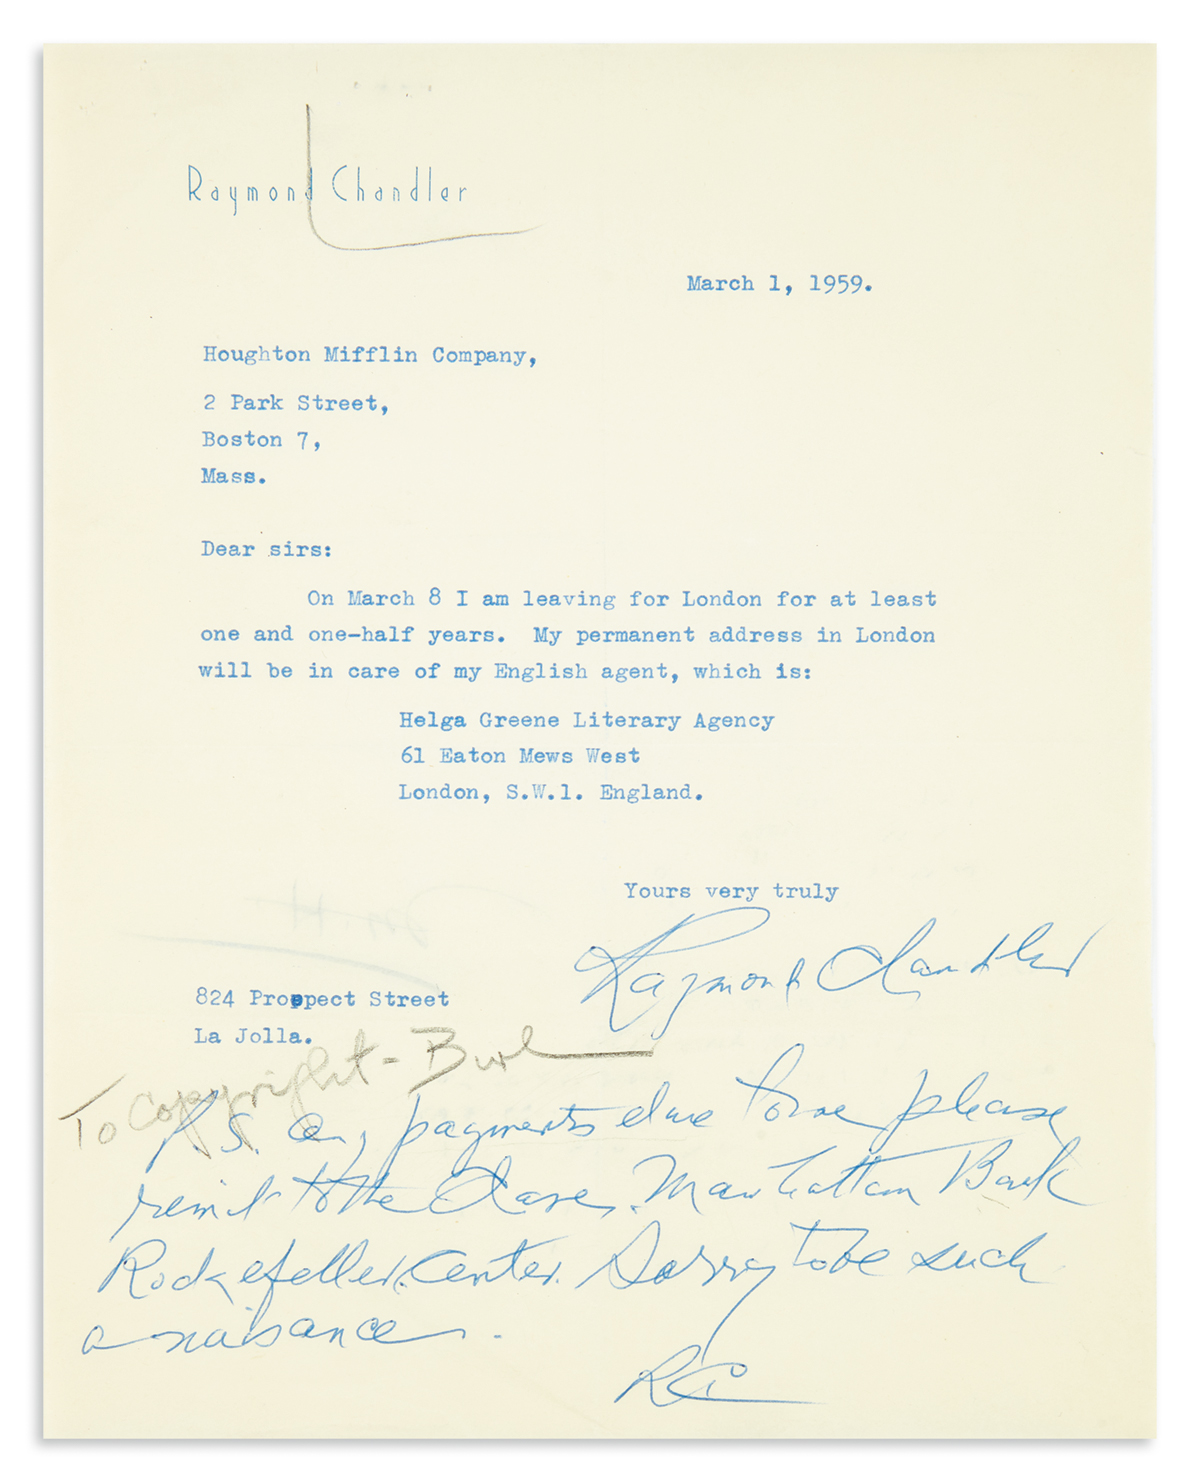 CHANDLER, RAYMOND. Two Typed Letters Signed, Ray or in full, to his publisher, Houghton Mifflin.